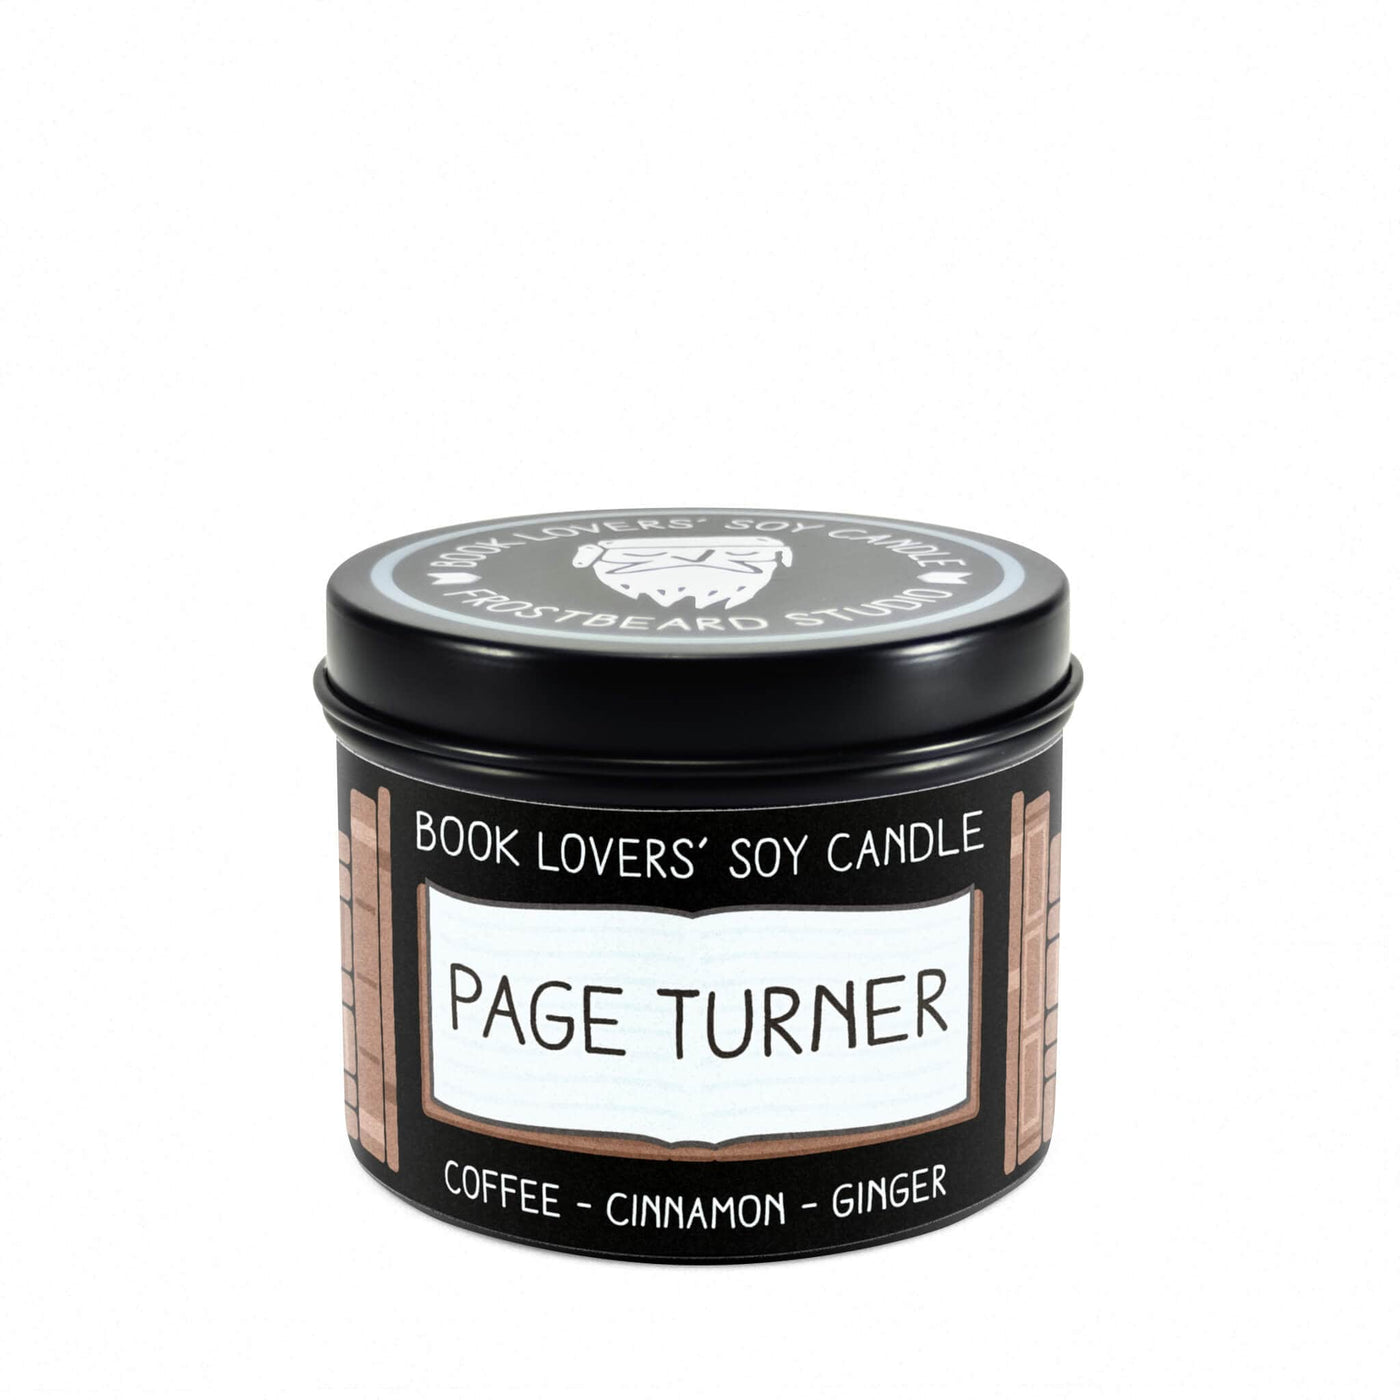 Page Turner  -  4 oz Tin  -  Book Lovers' Soy Candle  -  Frostbeard Studio